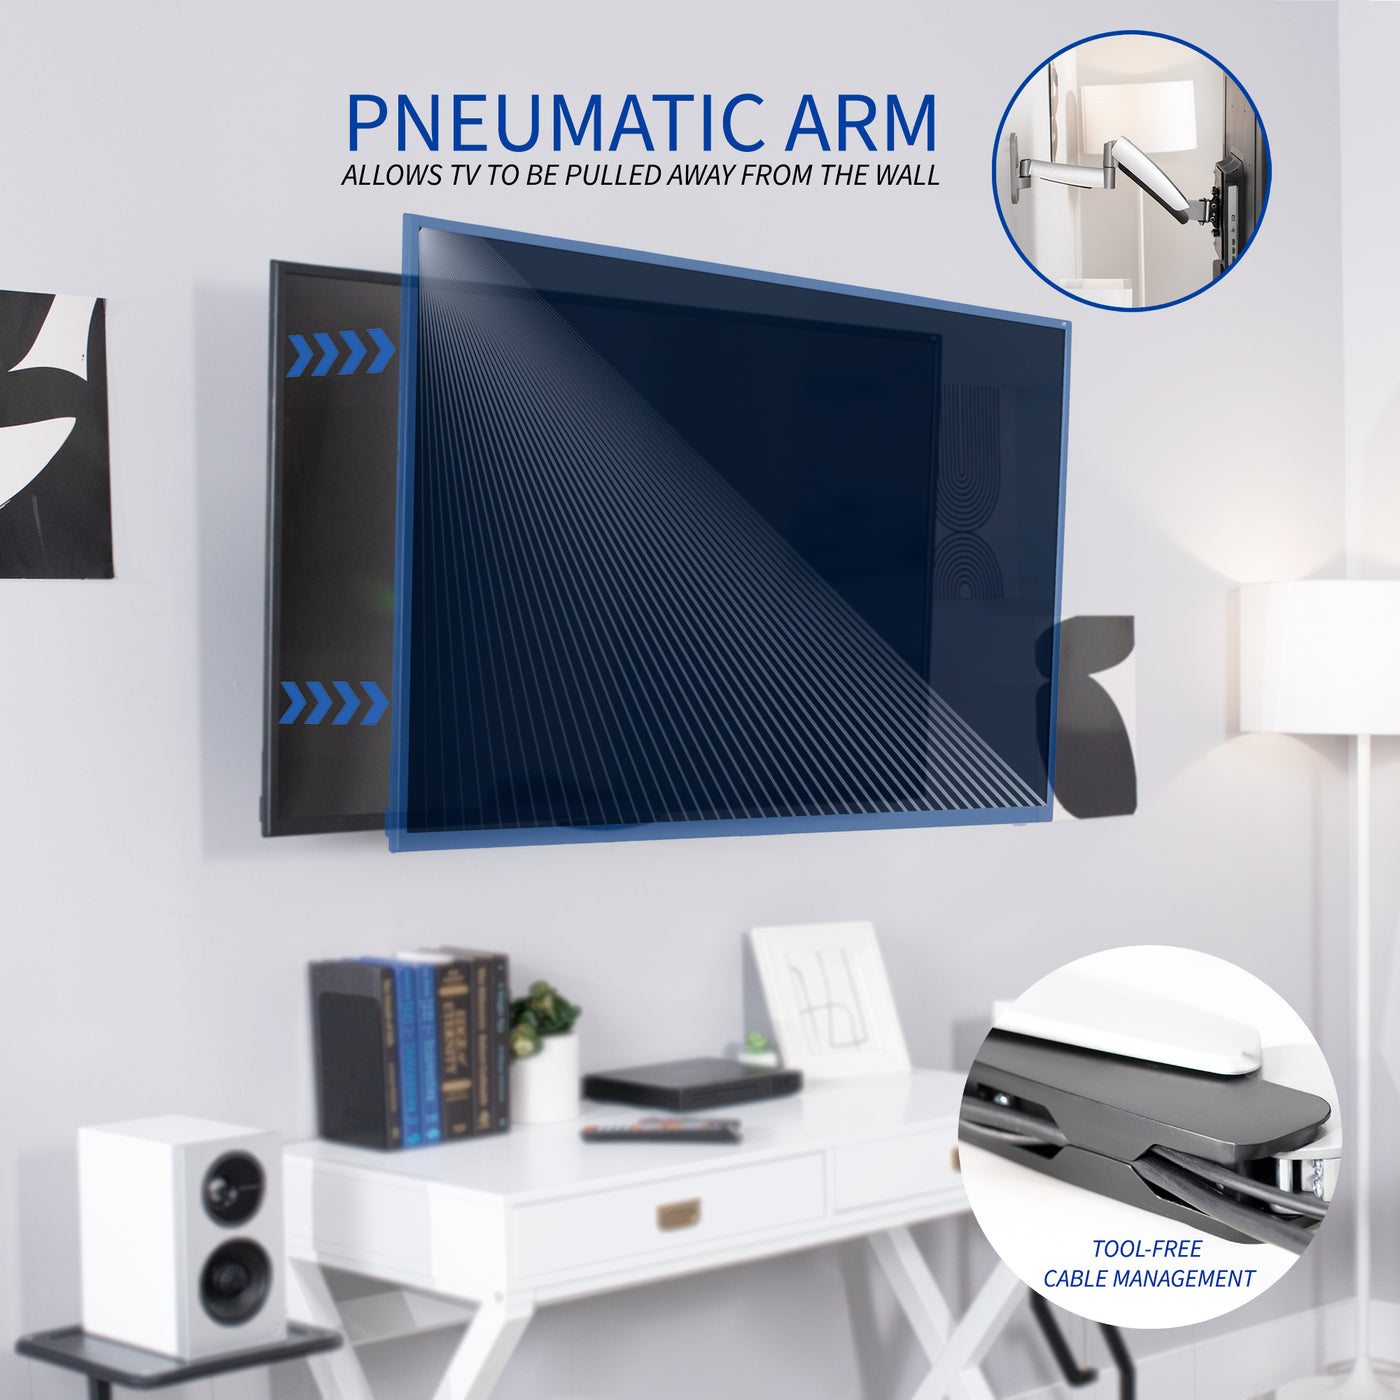 pneumatic arm allows the TV to be pulled away from wall